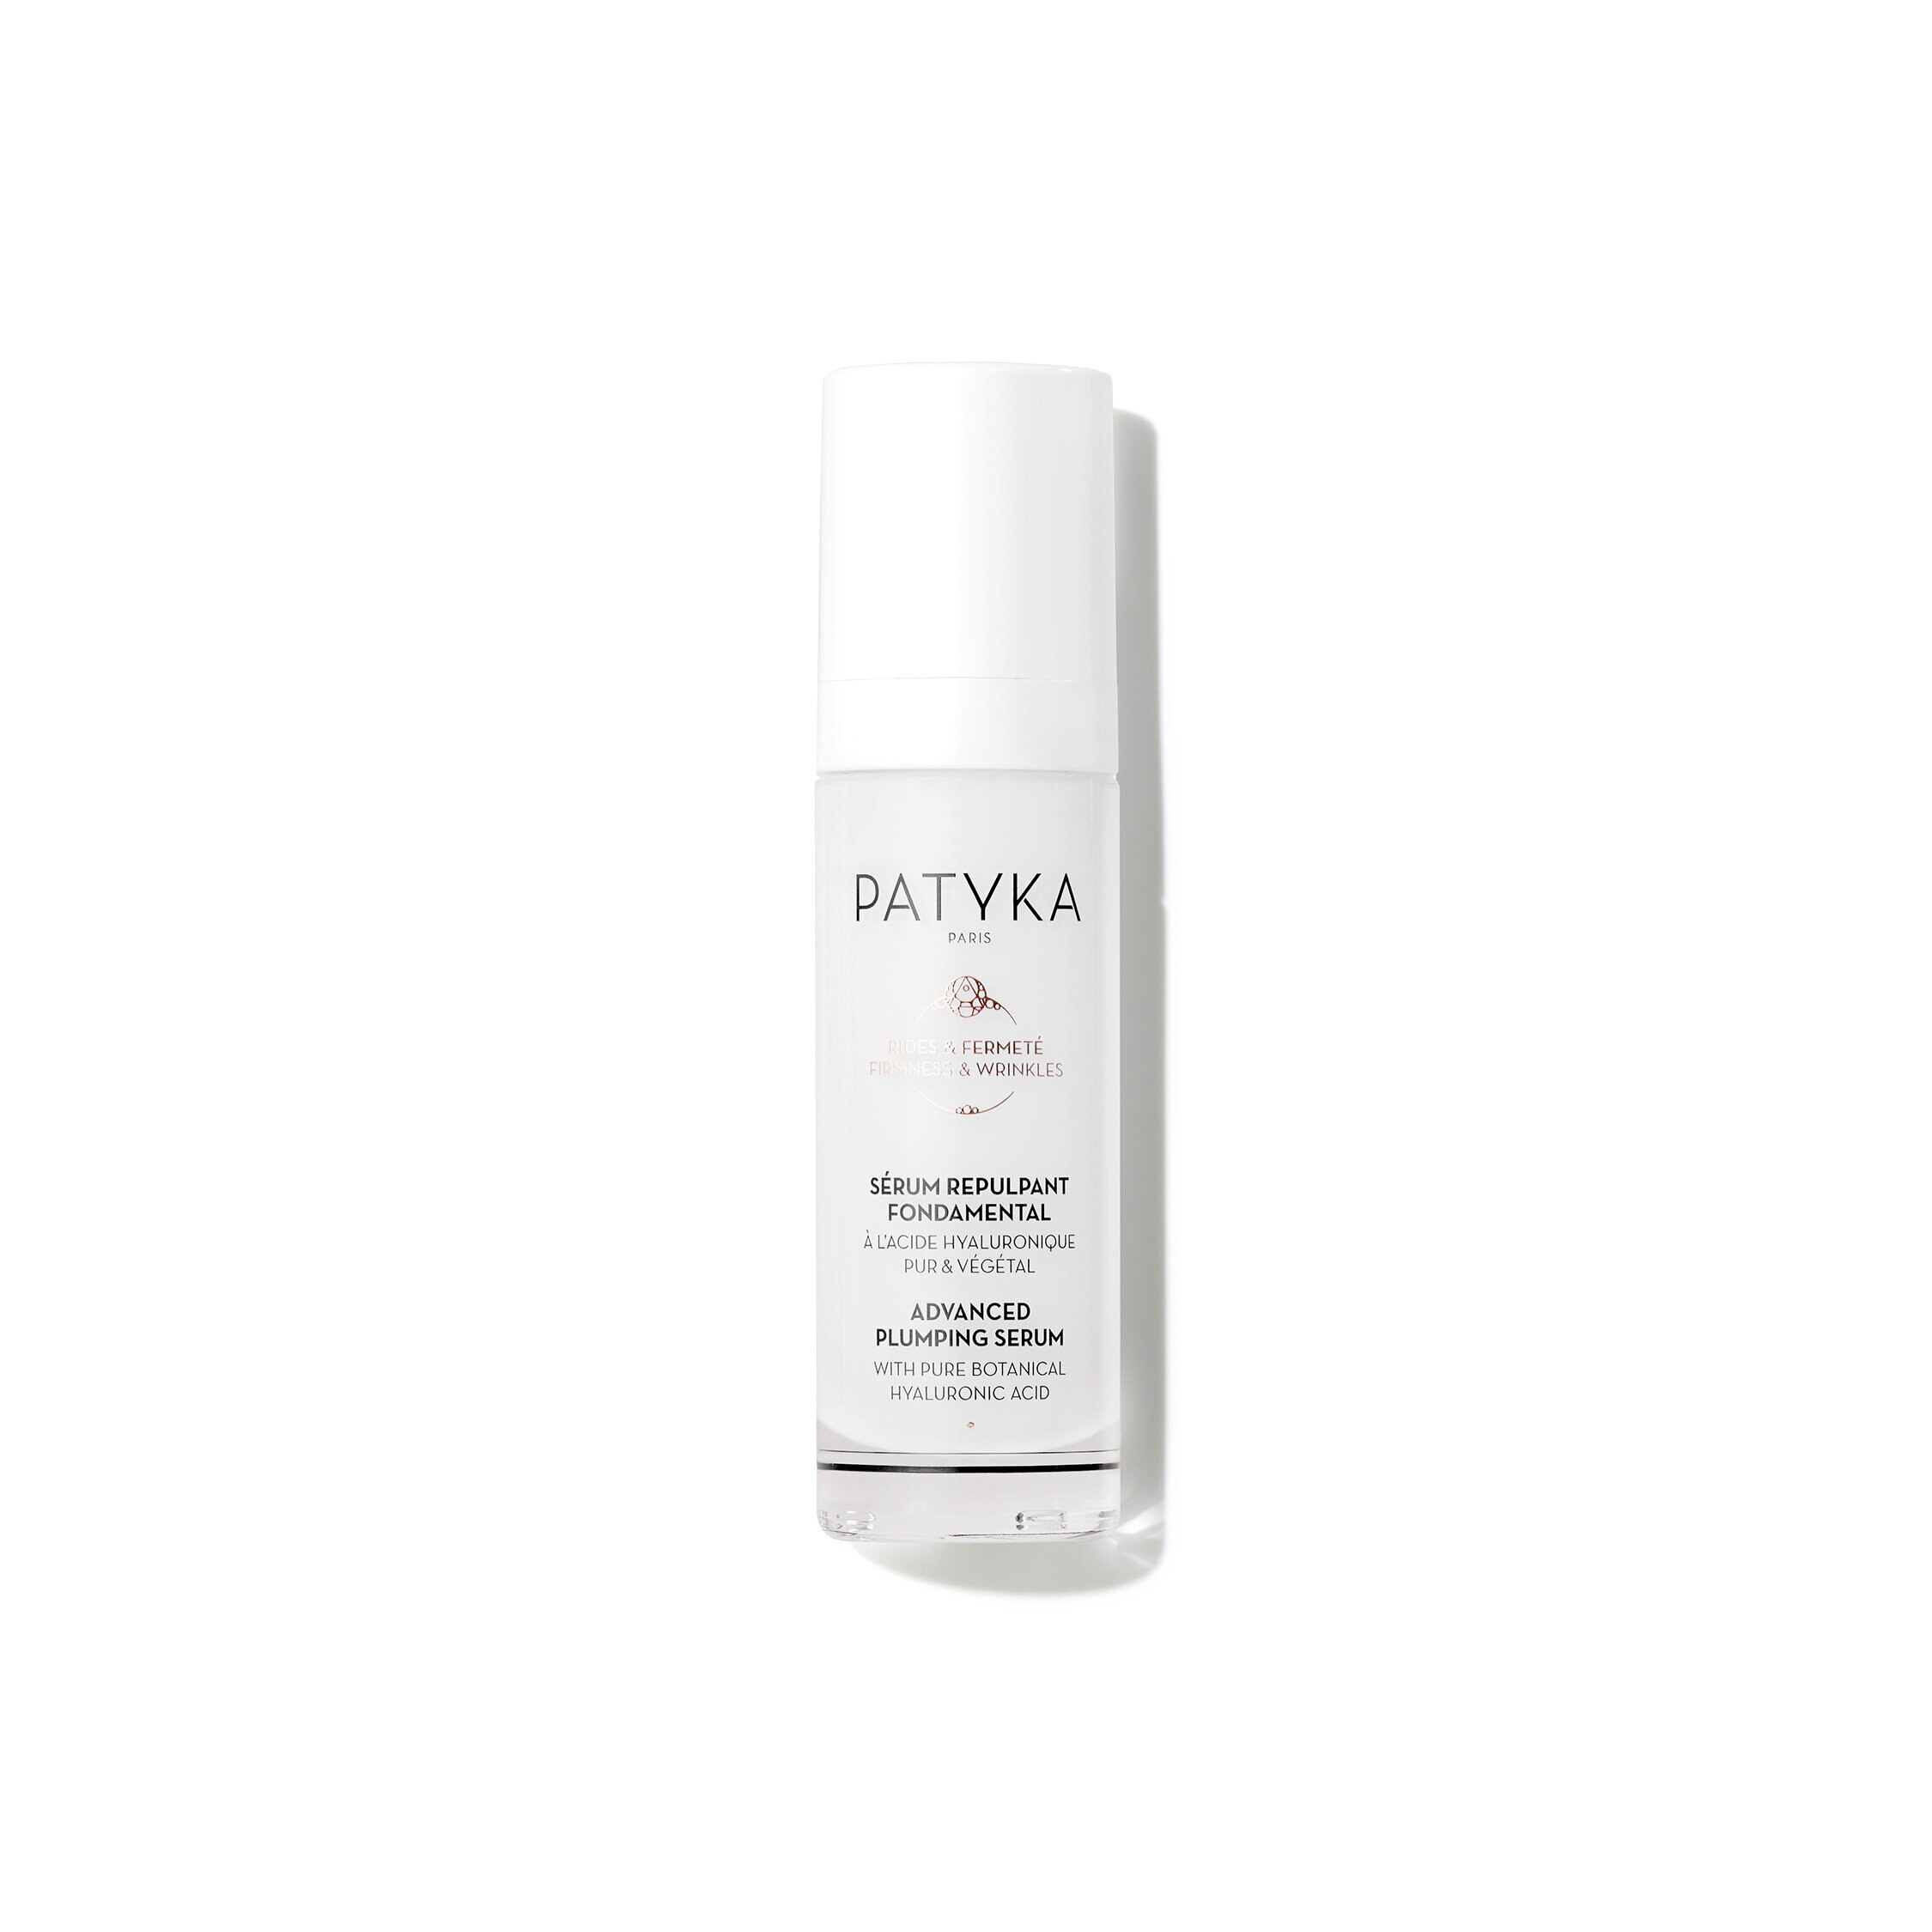 Patyka Youth Remodeling Cream, Thin Texture